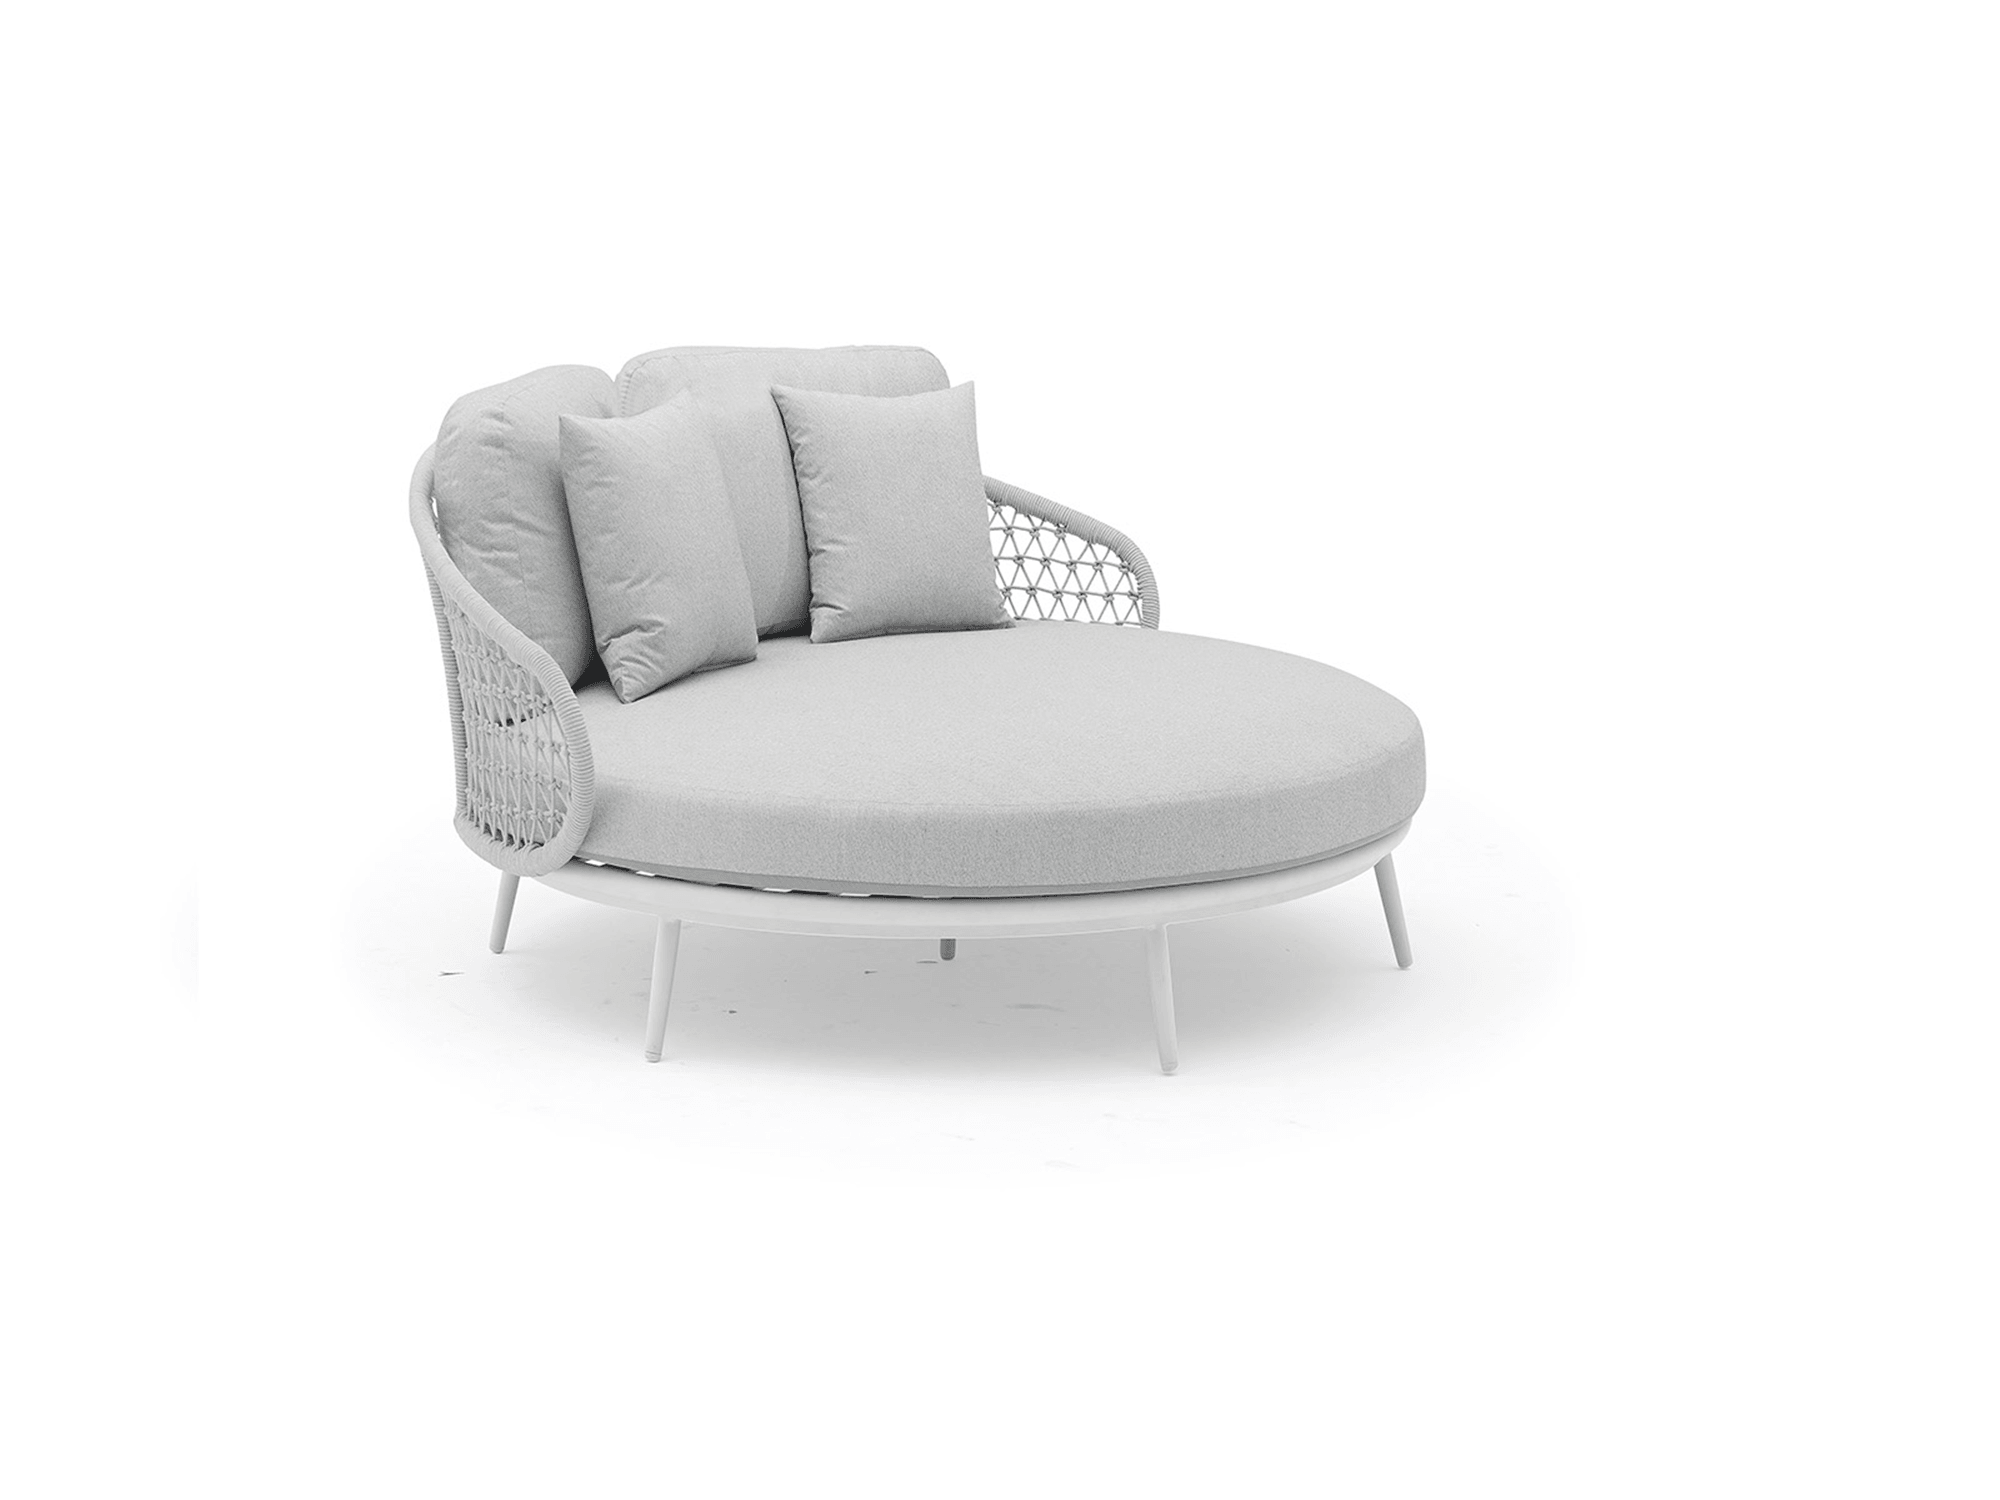 Alexandra Daybed - Euro Living Furniture